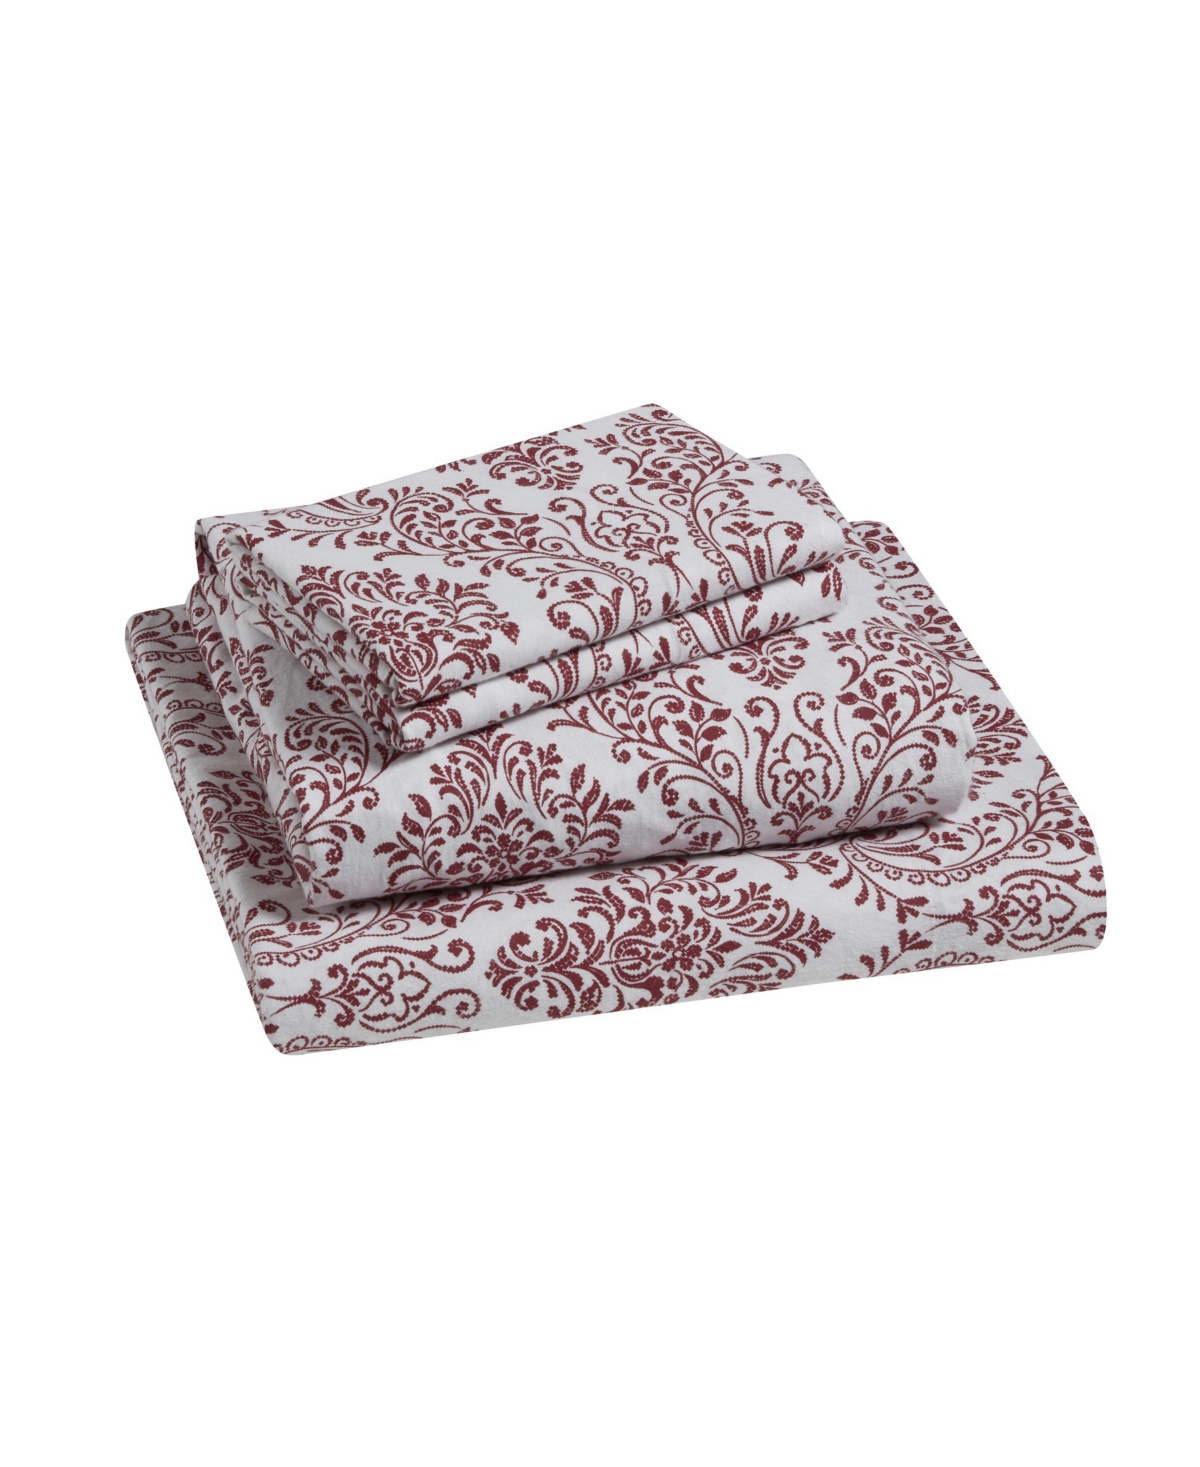 Tahari Home Damask 100% Cotton Flannel 4-pc. Sheet Set, King In Red,white